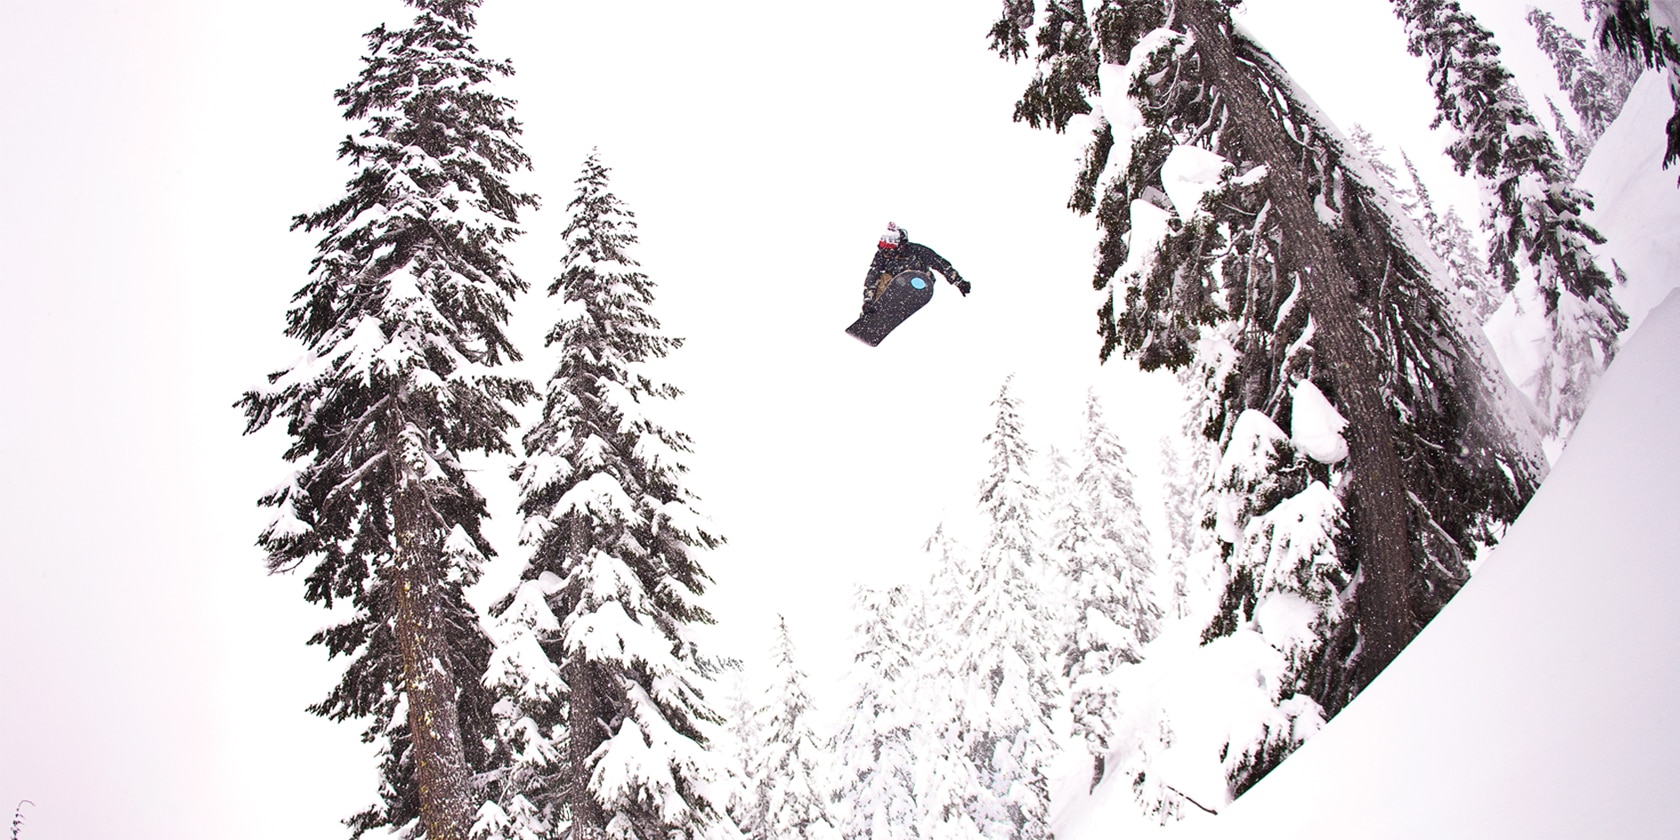 snowboarder getting huge air going down the snow covered mountain